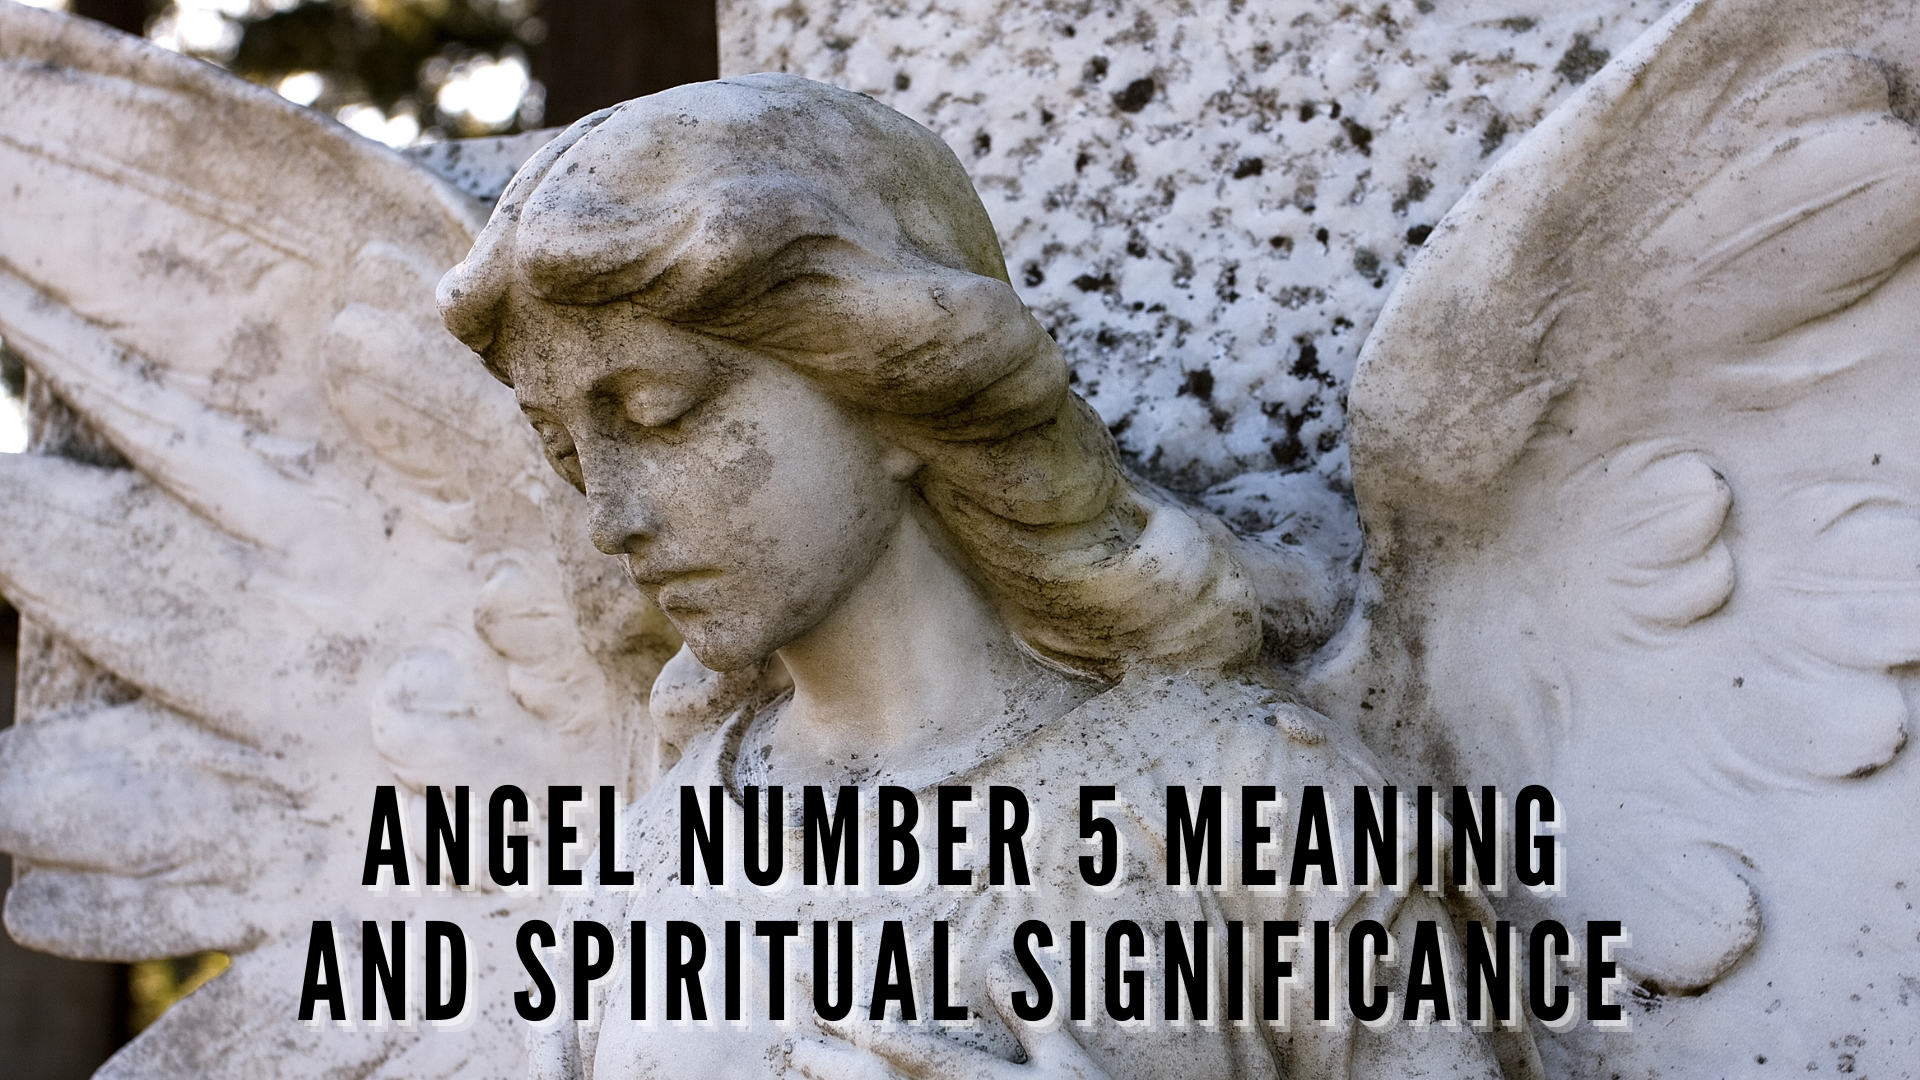 An angel statue with words Angel Number 5 Meaning And Spiritual Significance